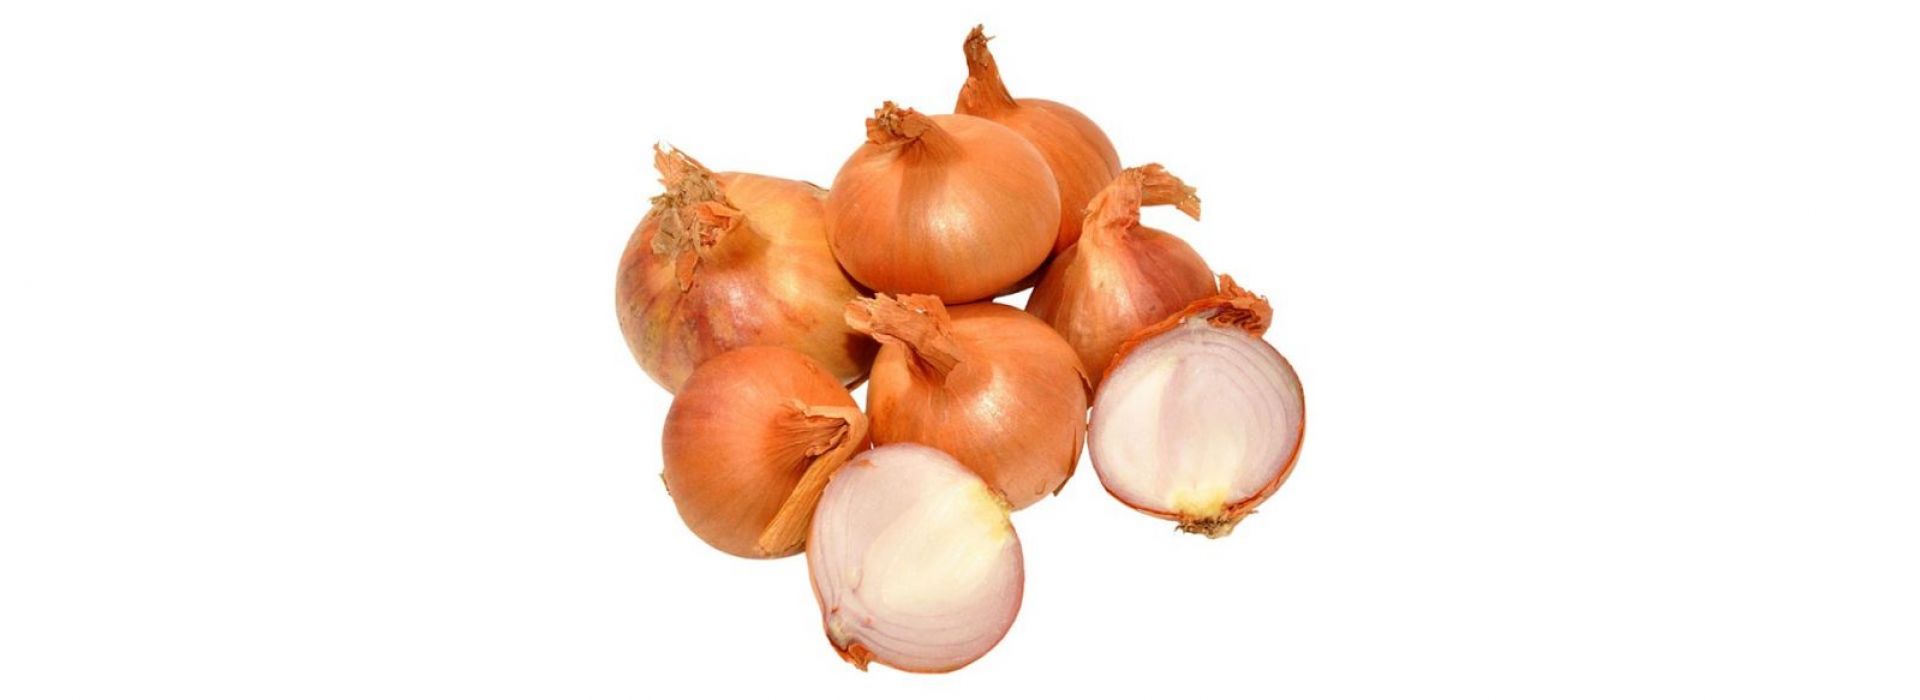 Red and White onion